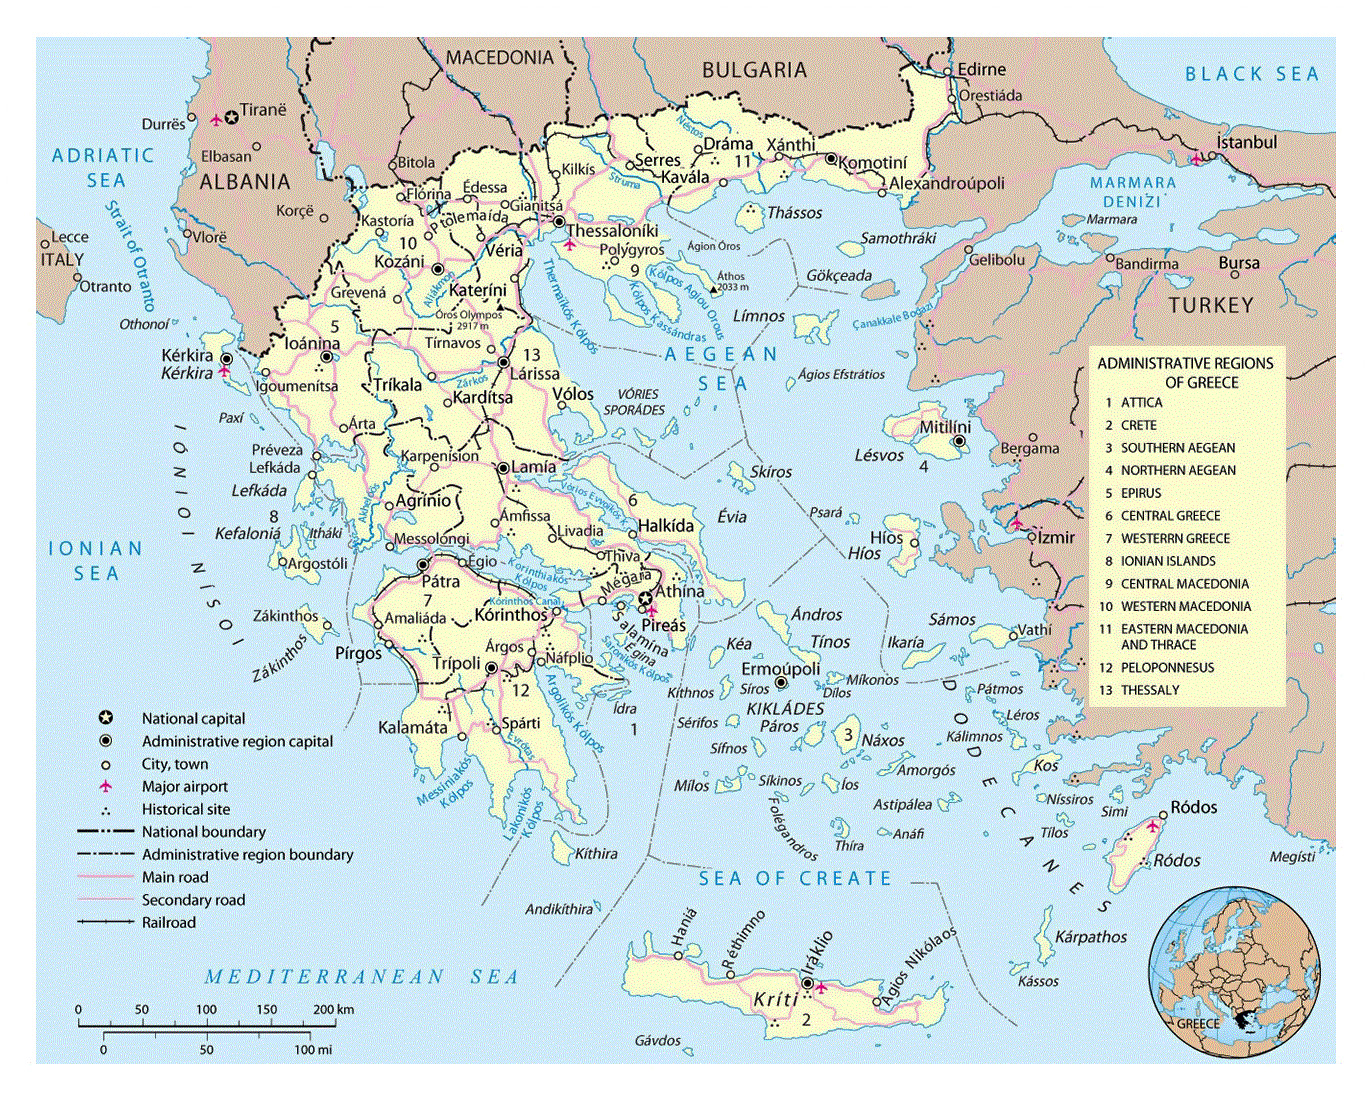 Political and administrative map of Greece | Greece | Europe | Mapslex ...